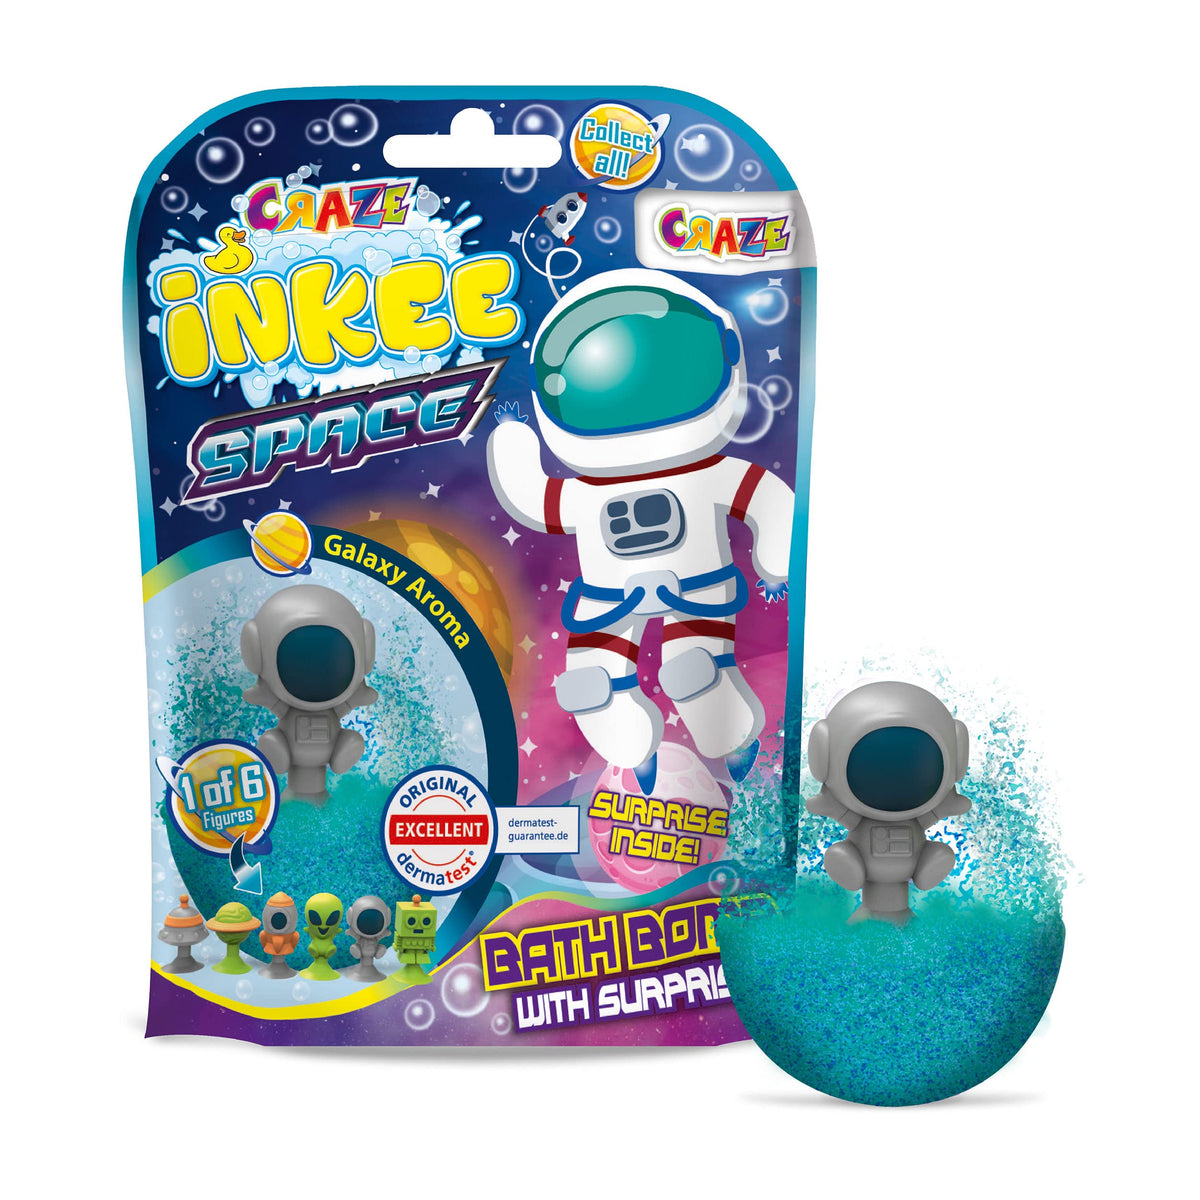 CRAZE Inkee Space Magic Fragrance Bath Ball with Suction Cup Surprise 23051 Bath Fun for Children